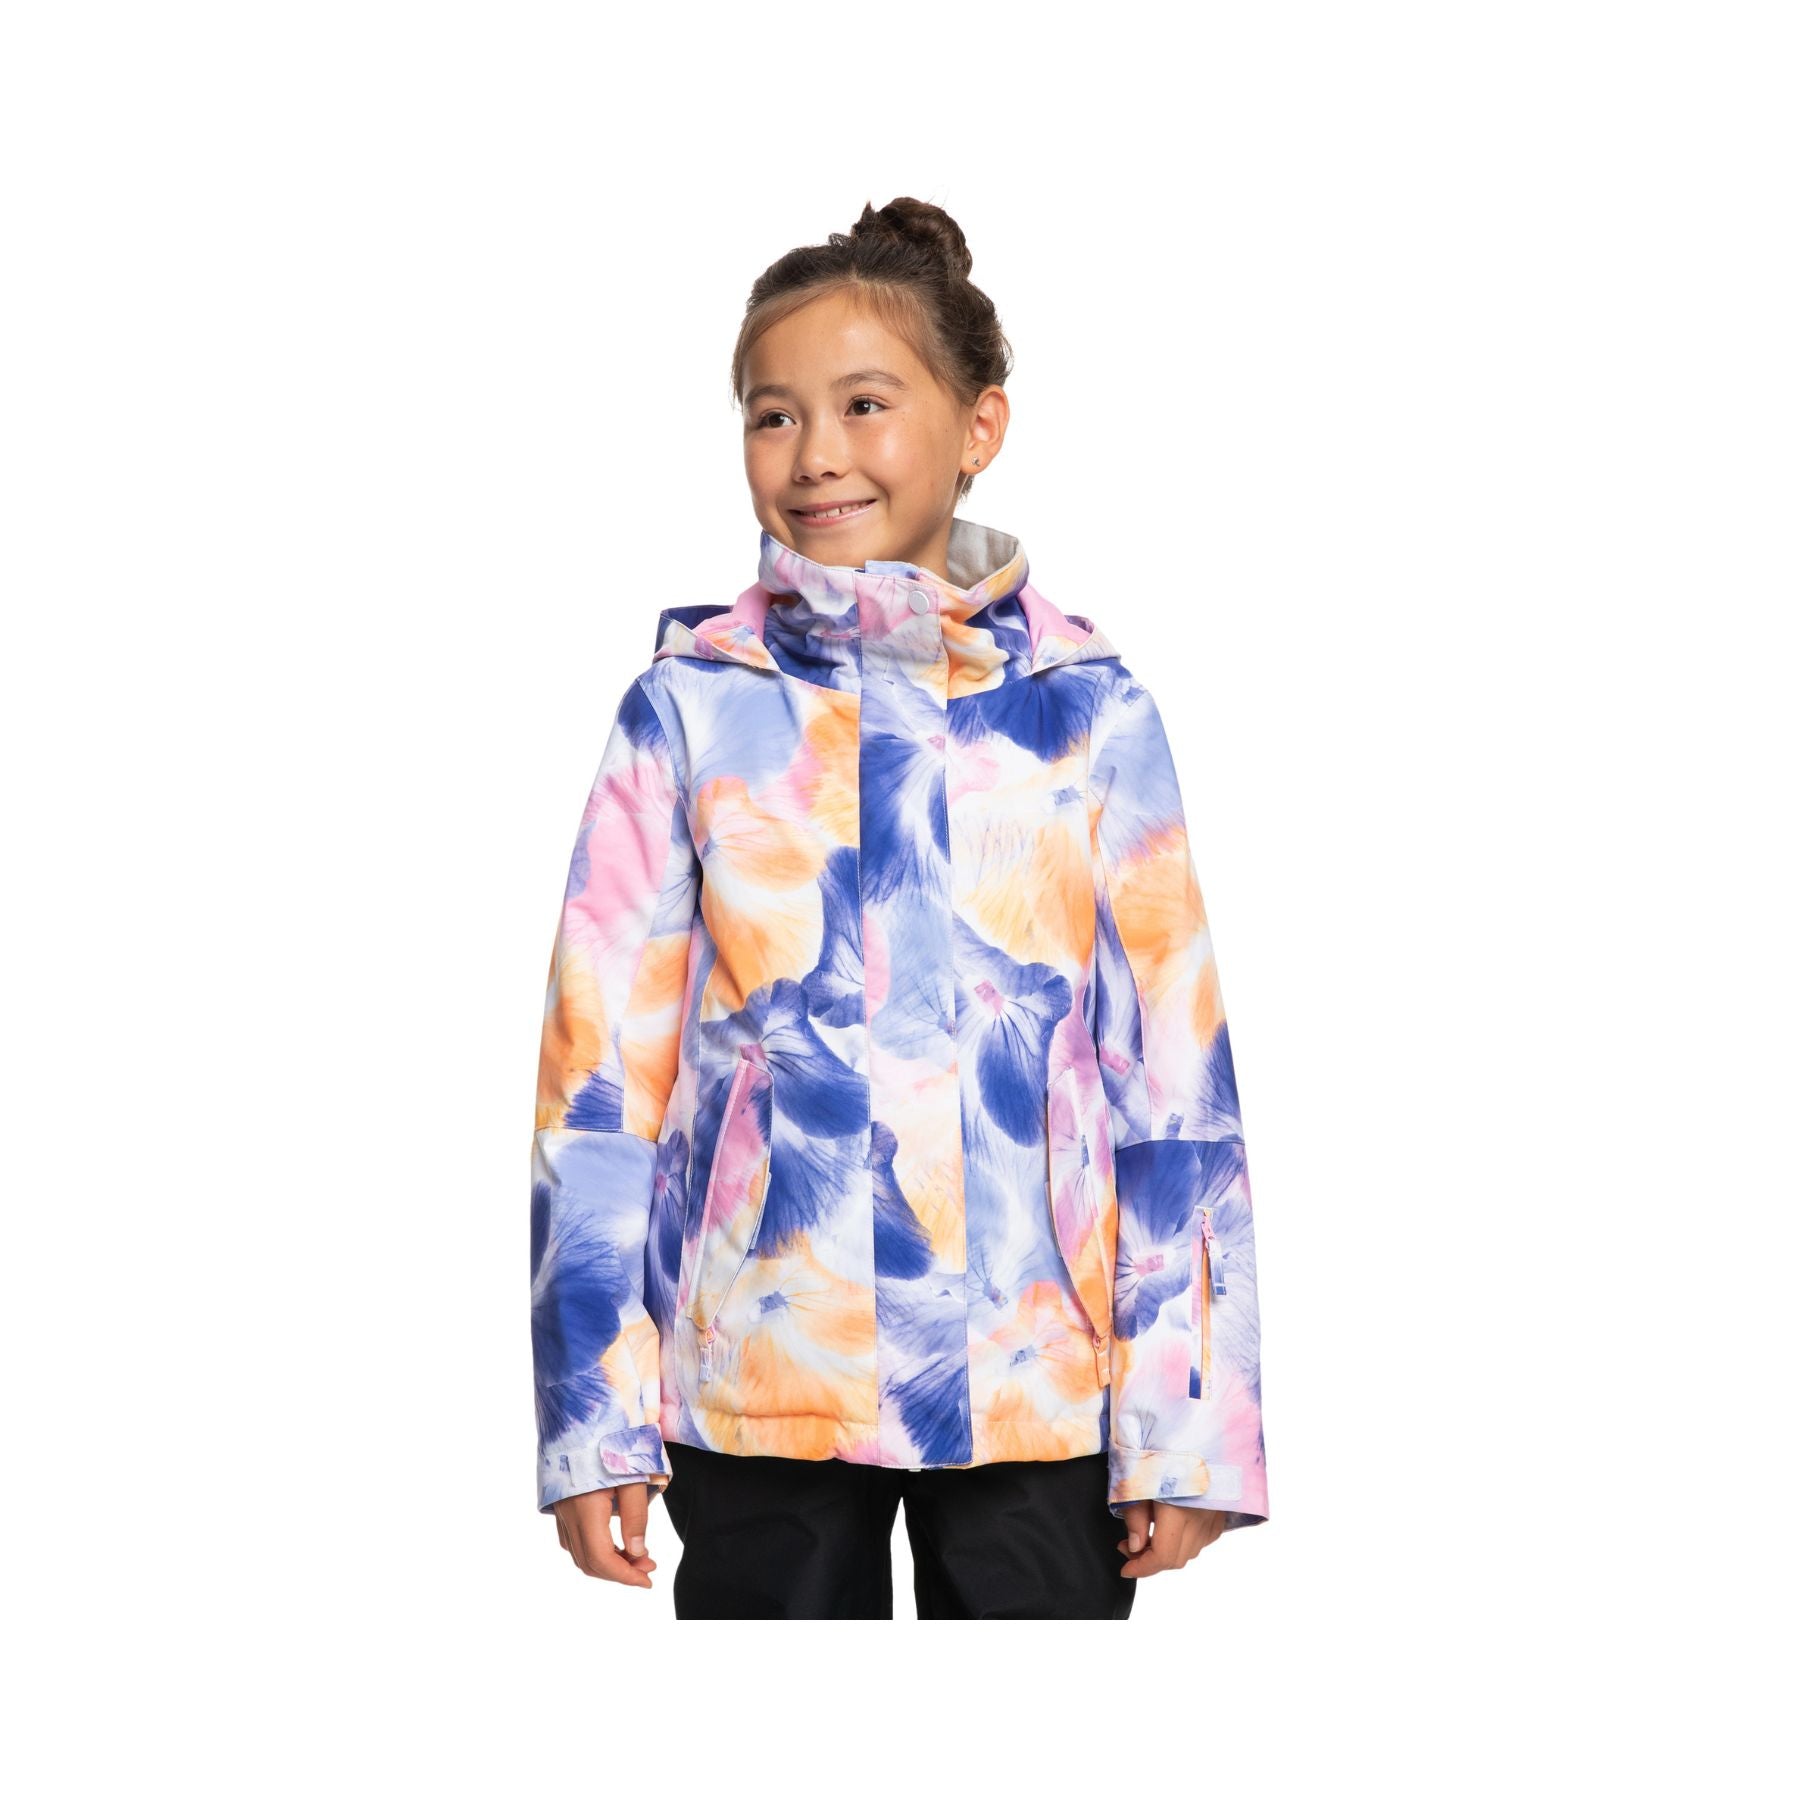 Roxy Jetty Girls Jacket in Pansy Pansy RG